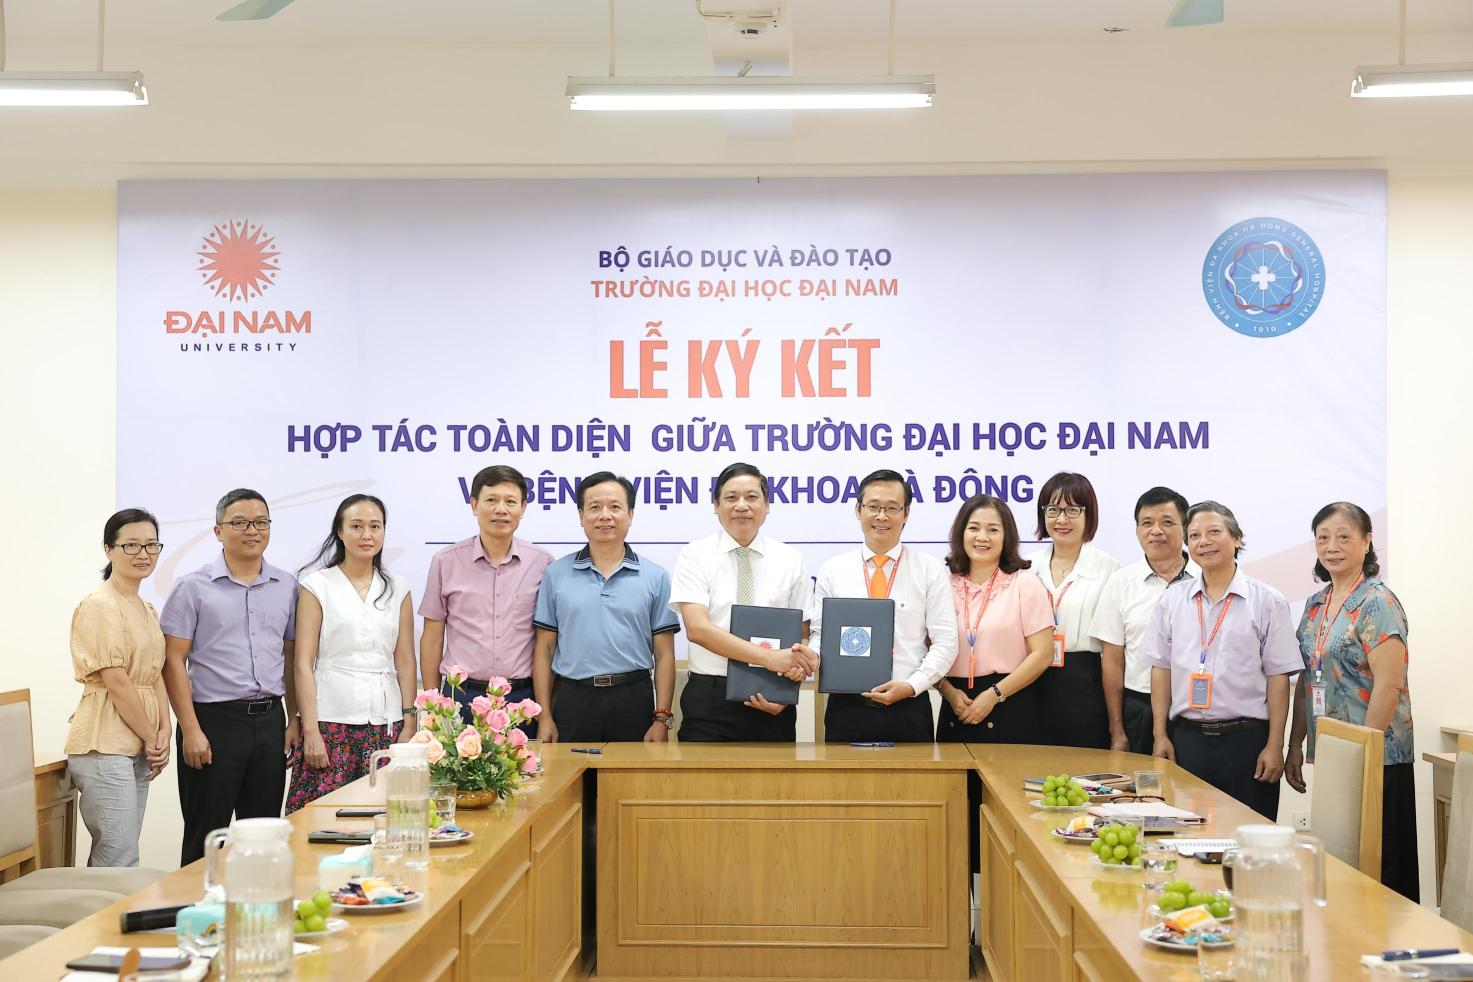 Dai Nam University establishes a comprehensive partnership with Ha Dong General Hospital to provide training for students in the Healthcare sector